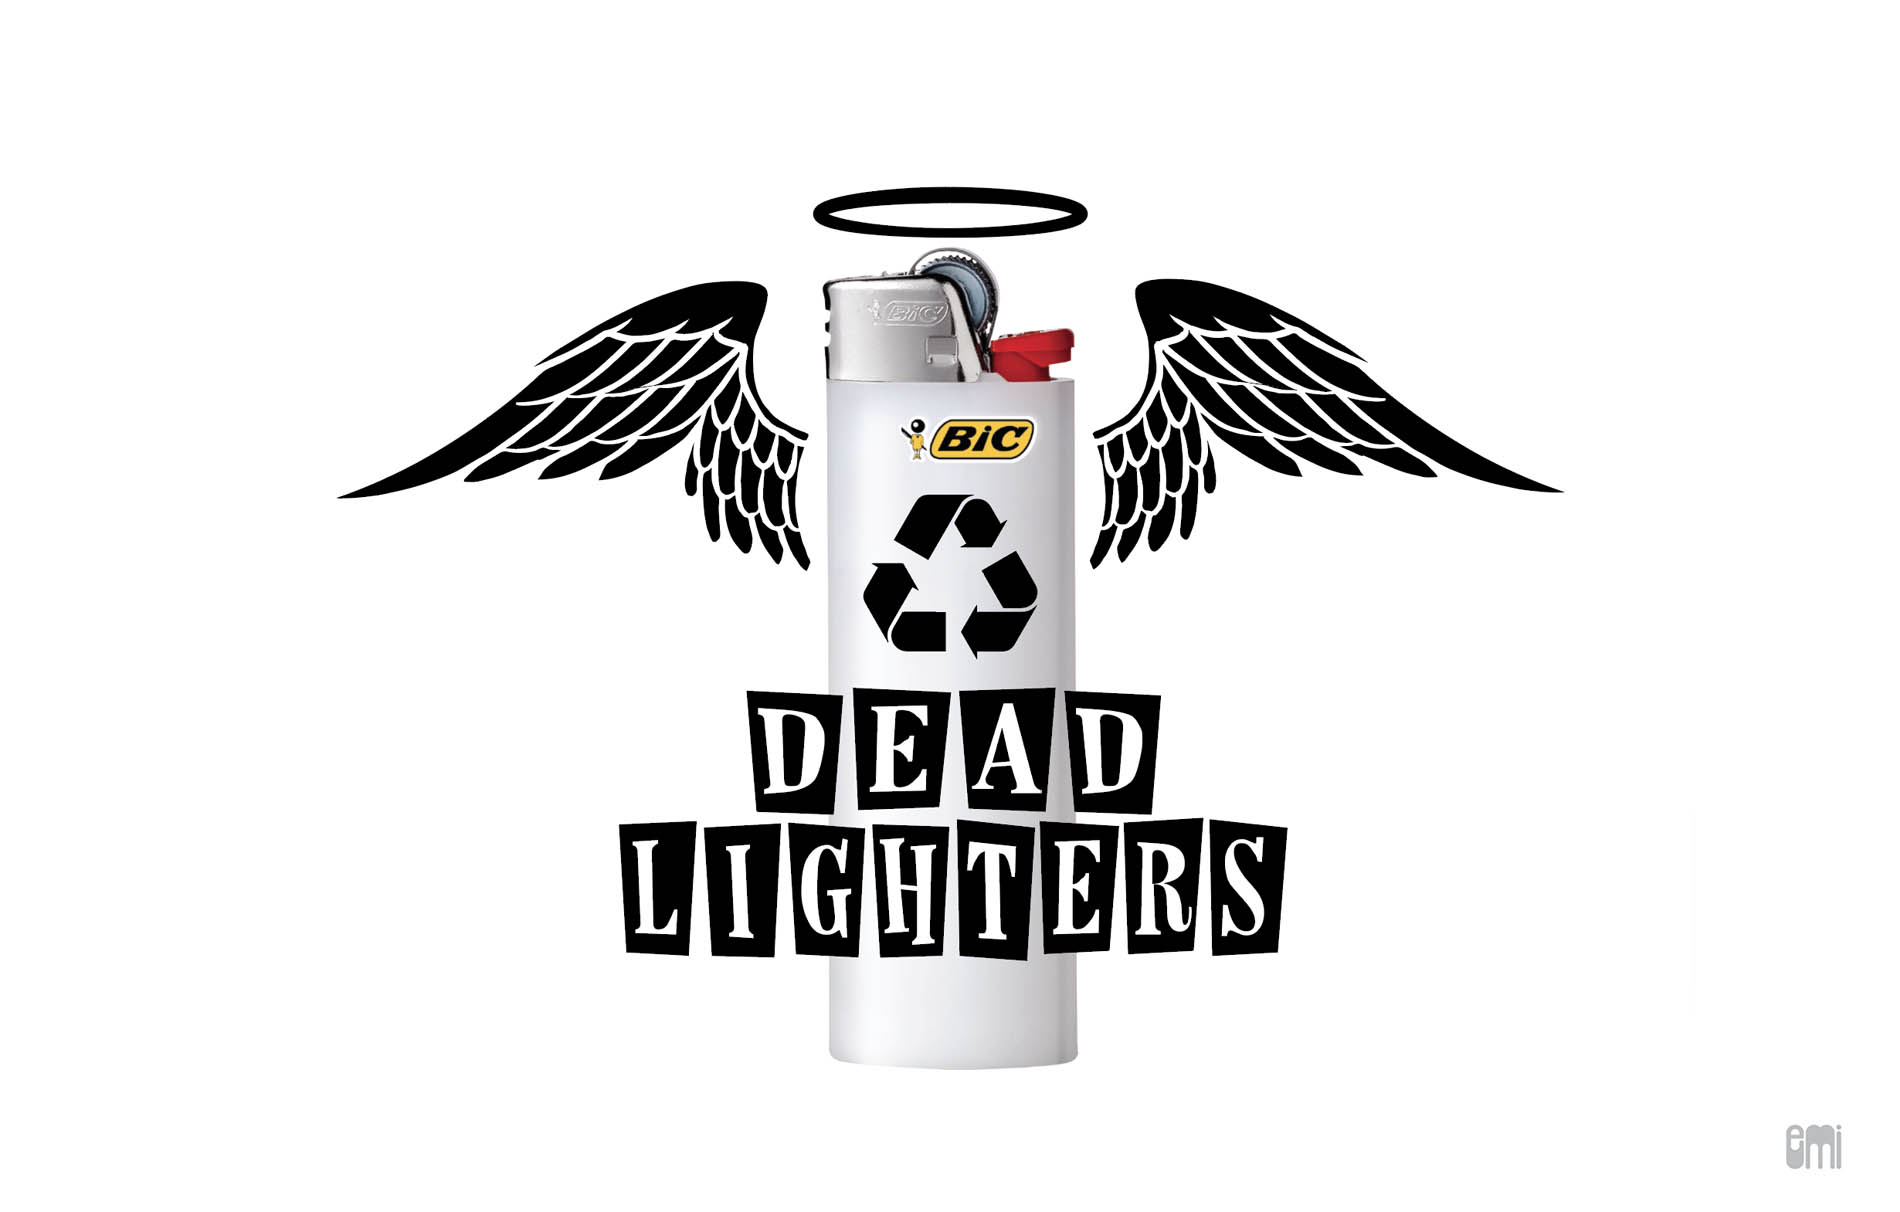 2015.7.15 Recycle Bic lighters Campaign, design by emi